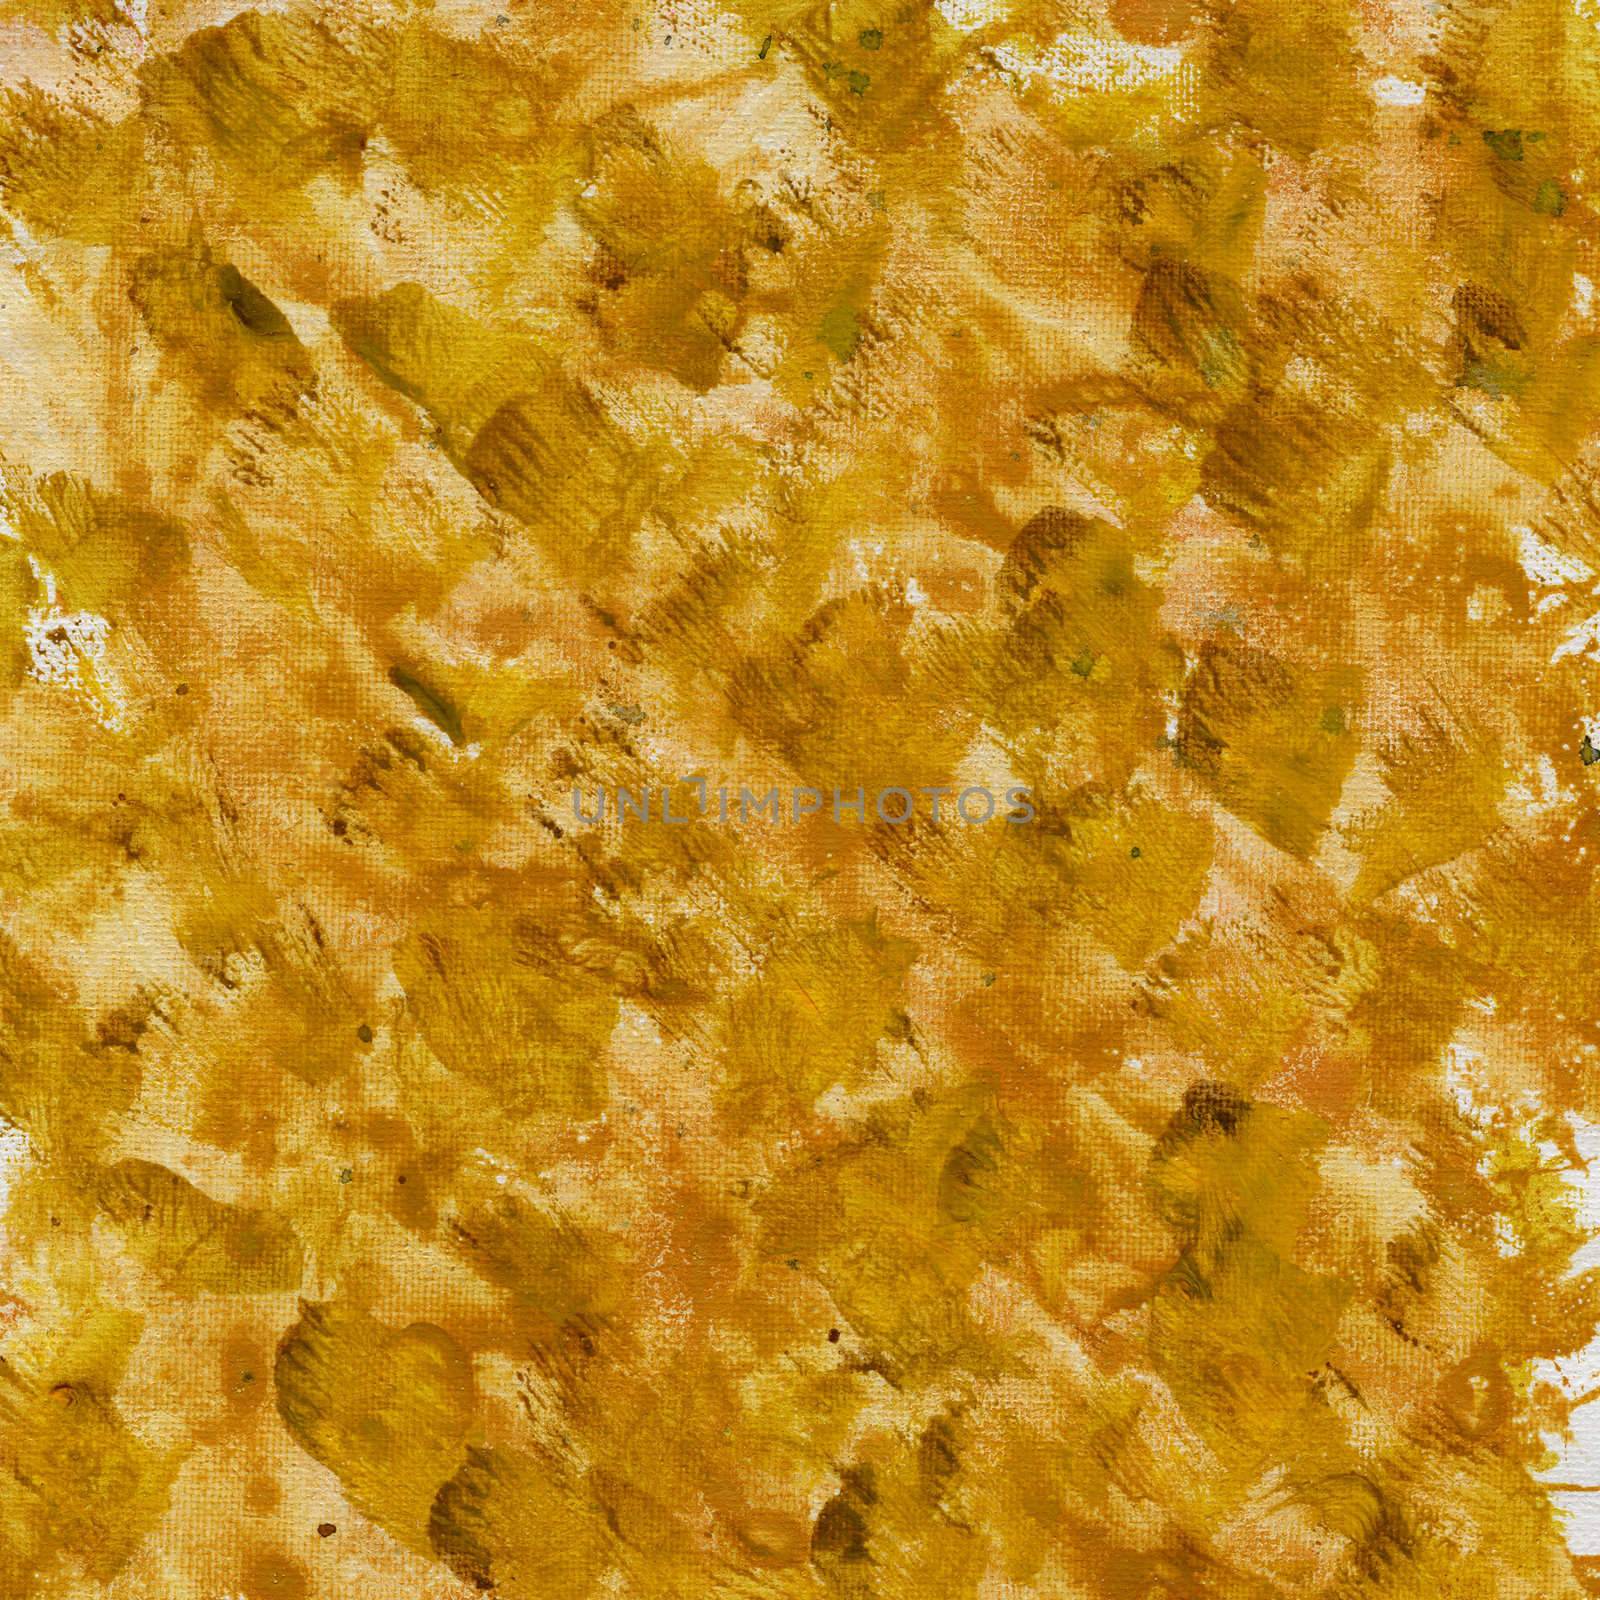 brown yellow splashes on canvas by PixelsAway